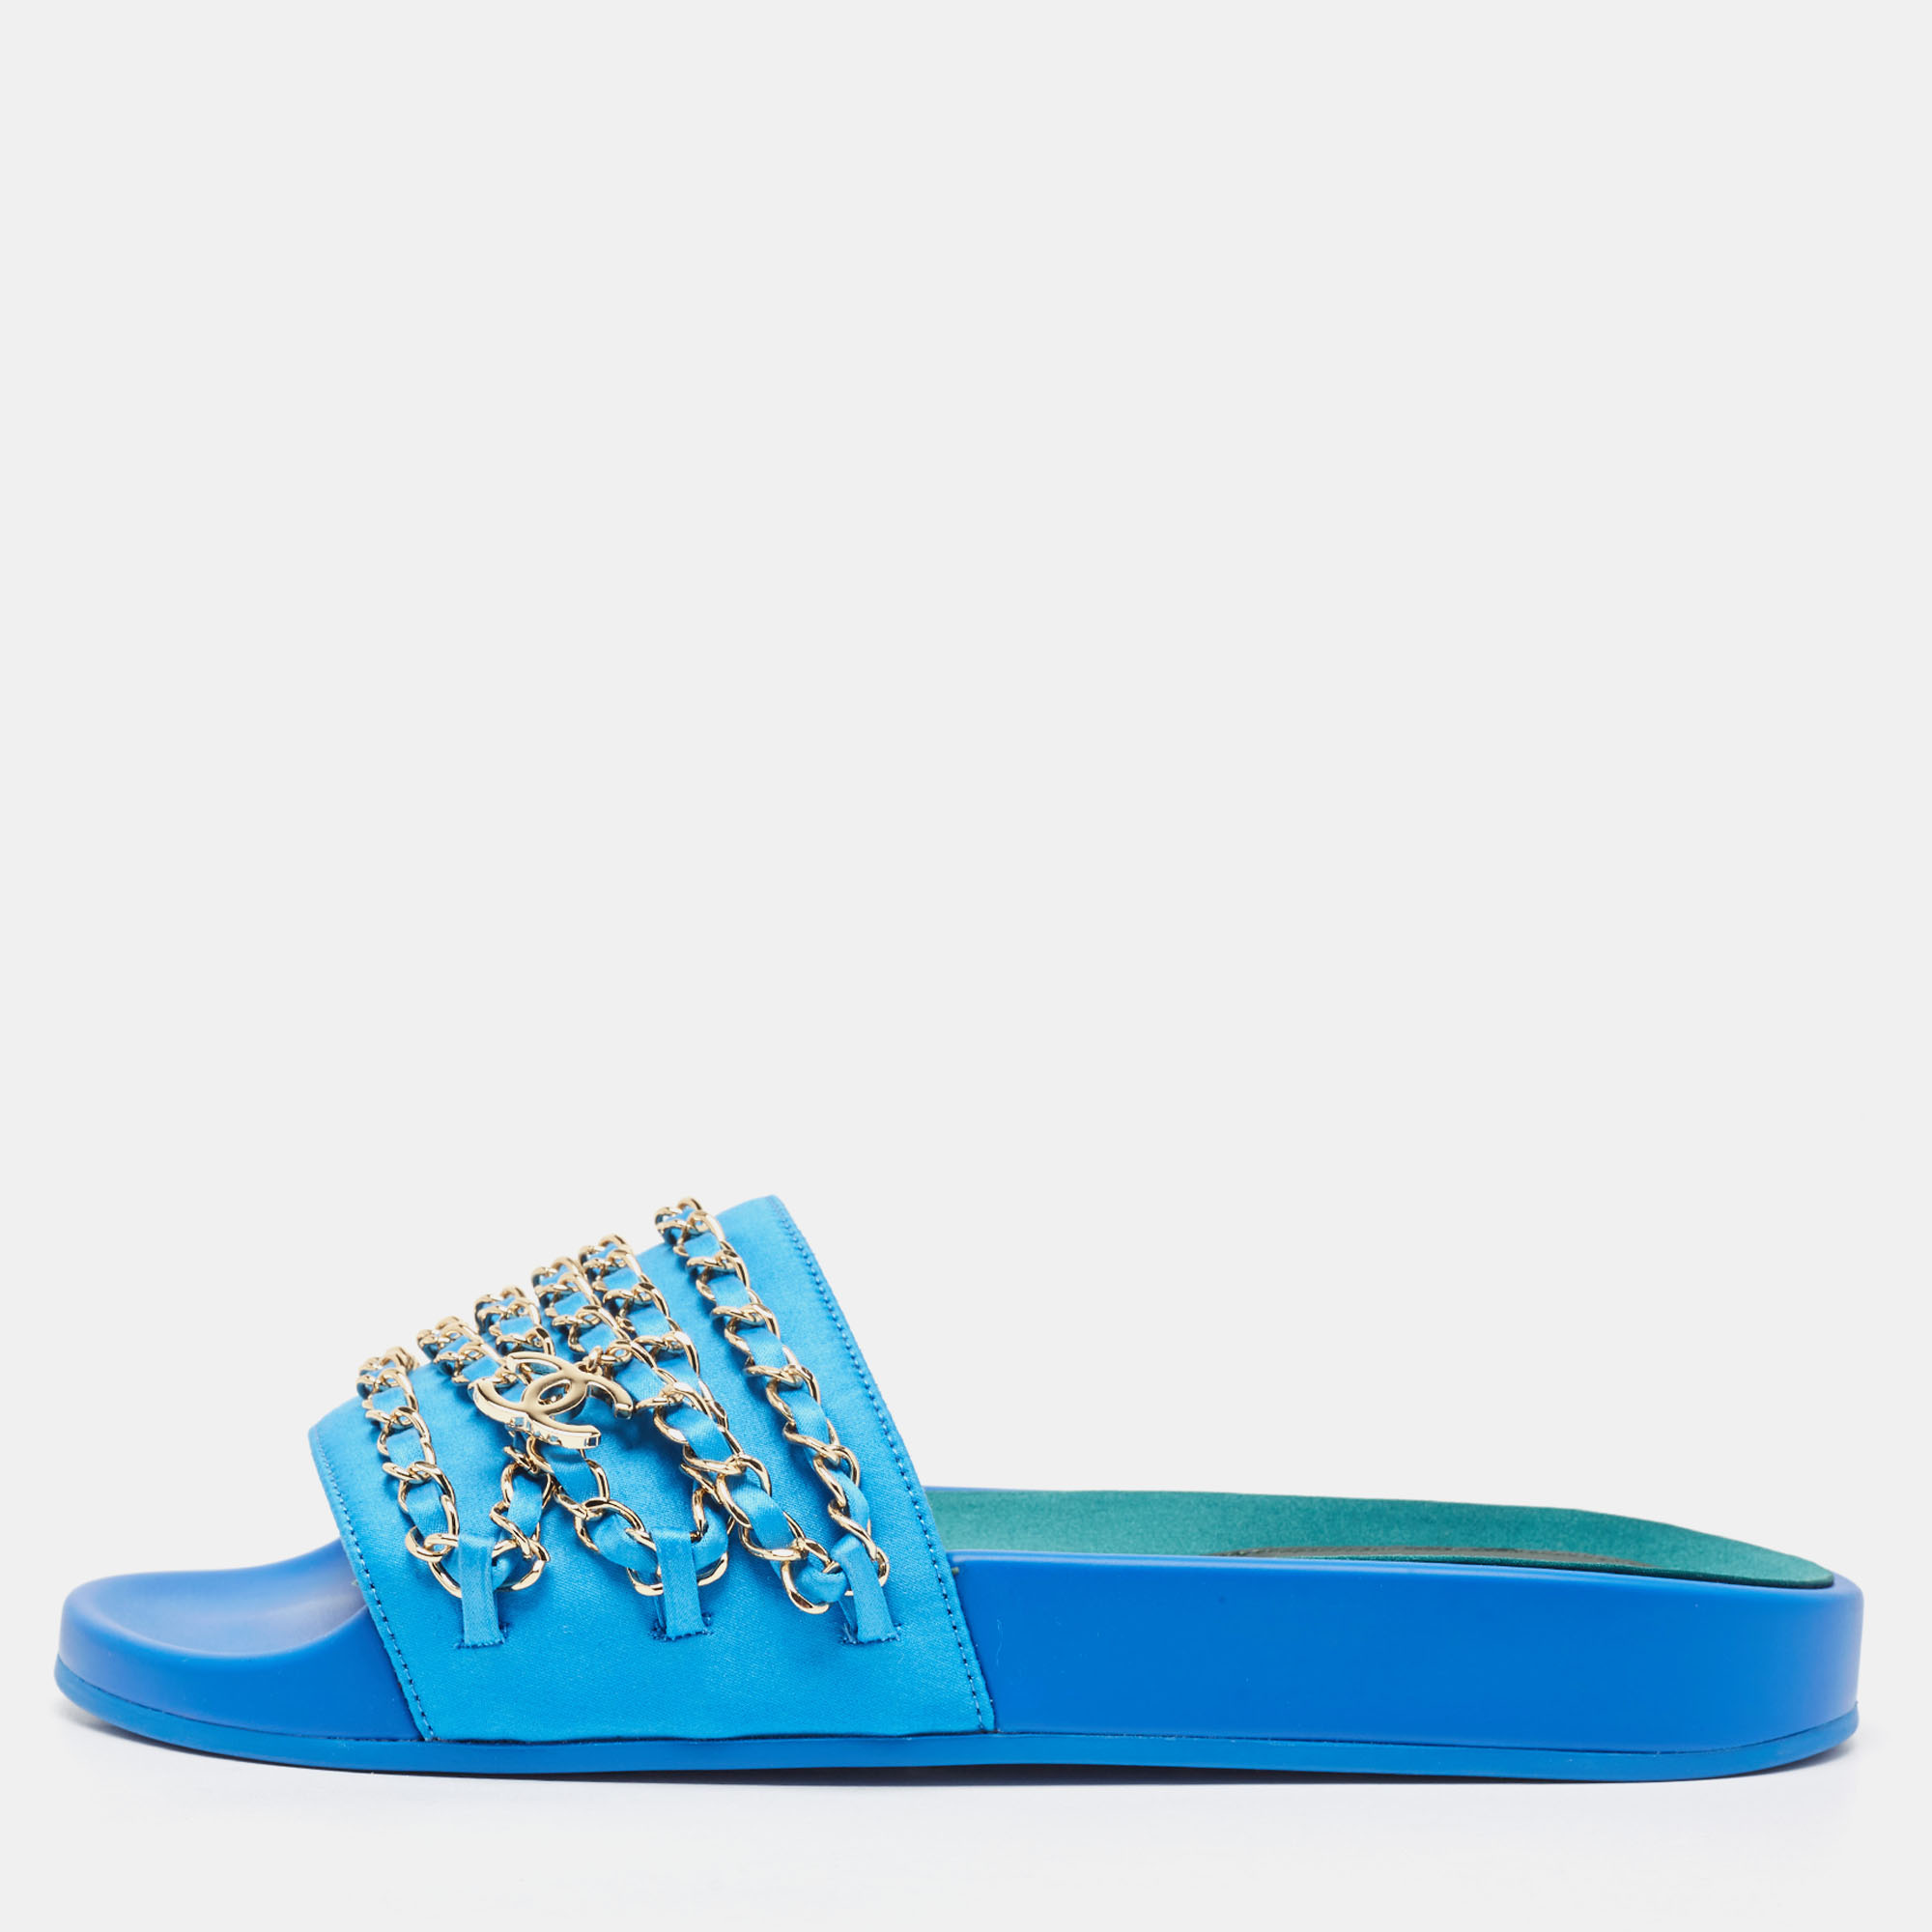 Pre-owned Chanel Blue Satin Tropiconic Chain Detail Flat Slides Size 38